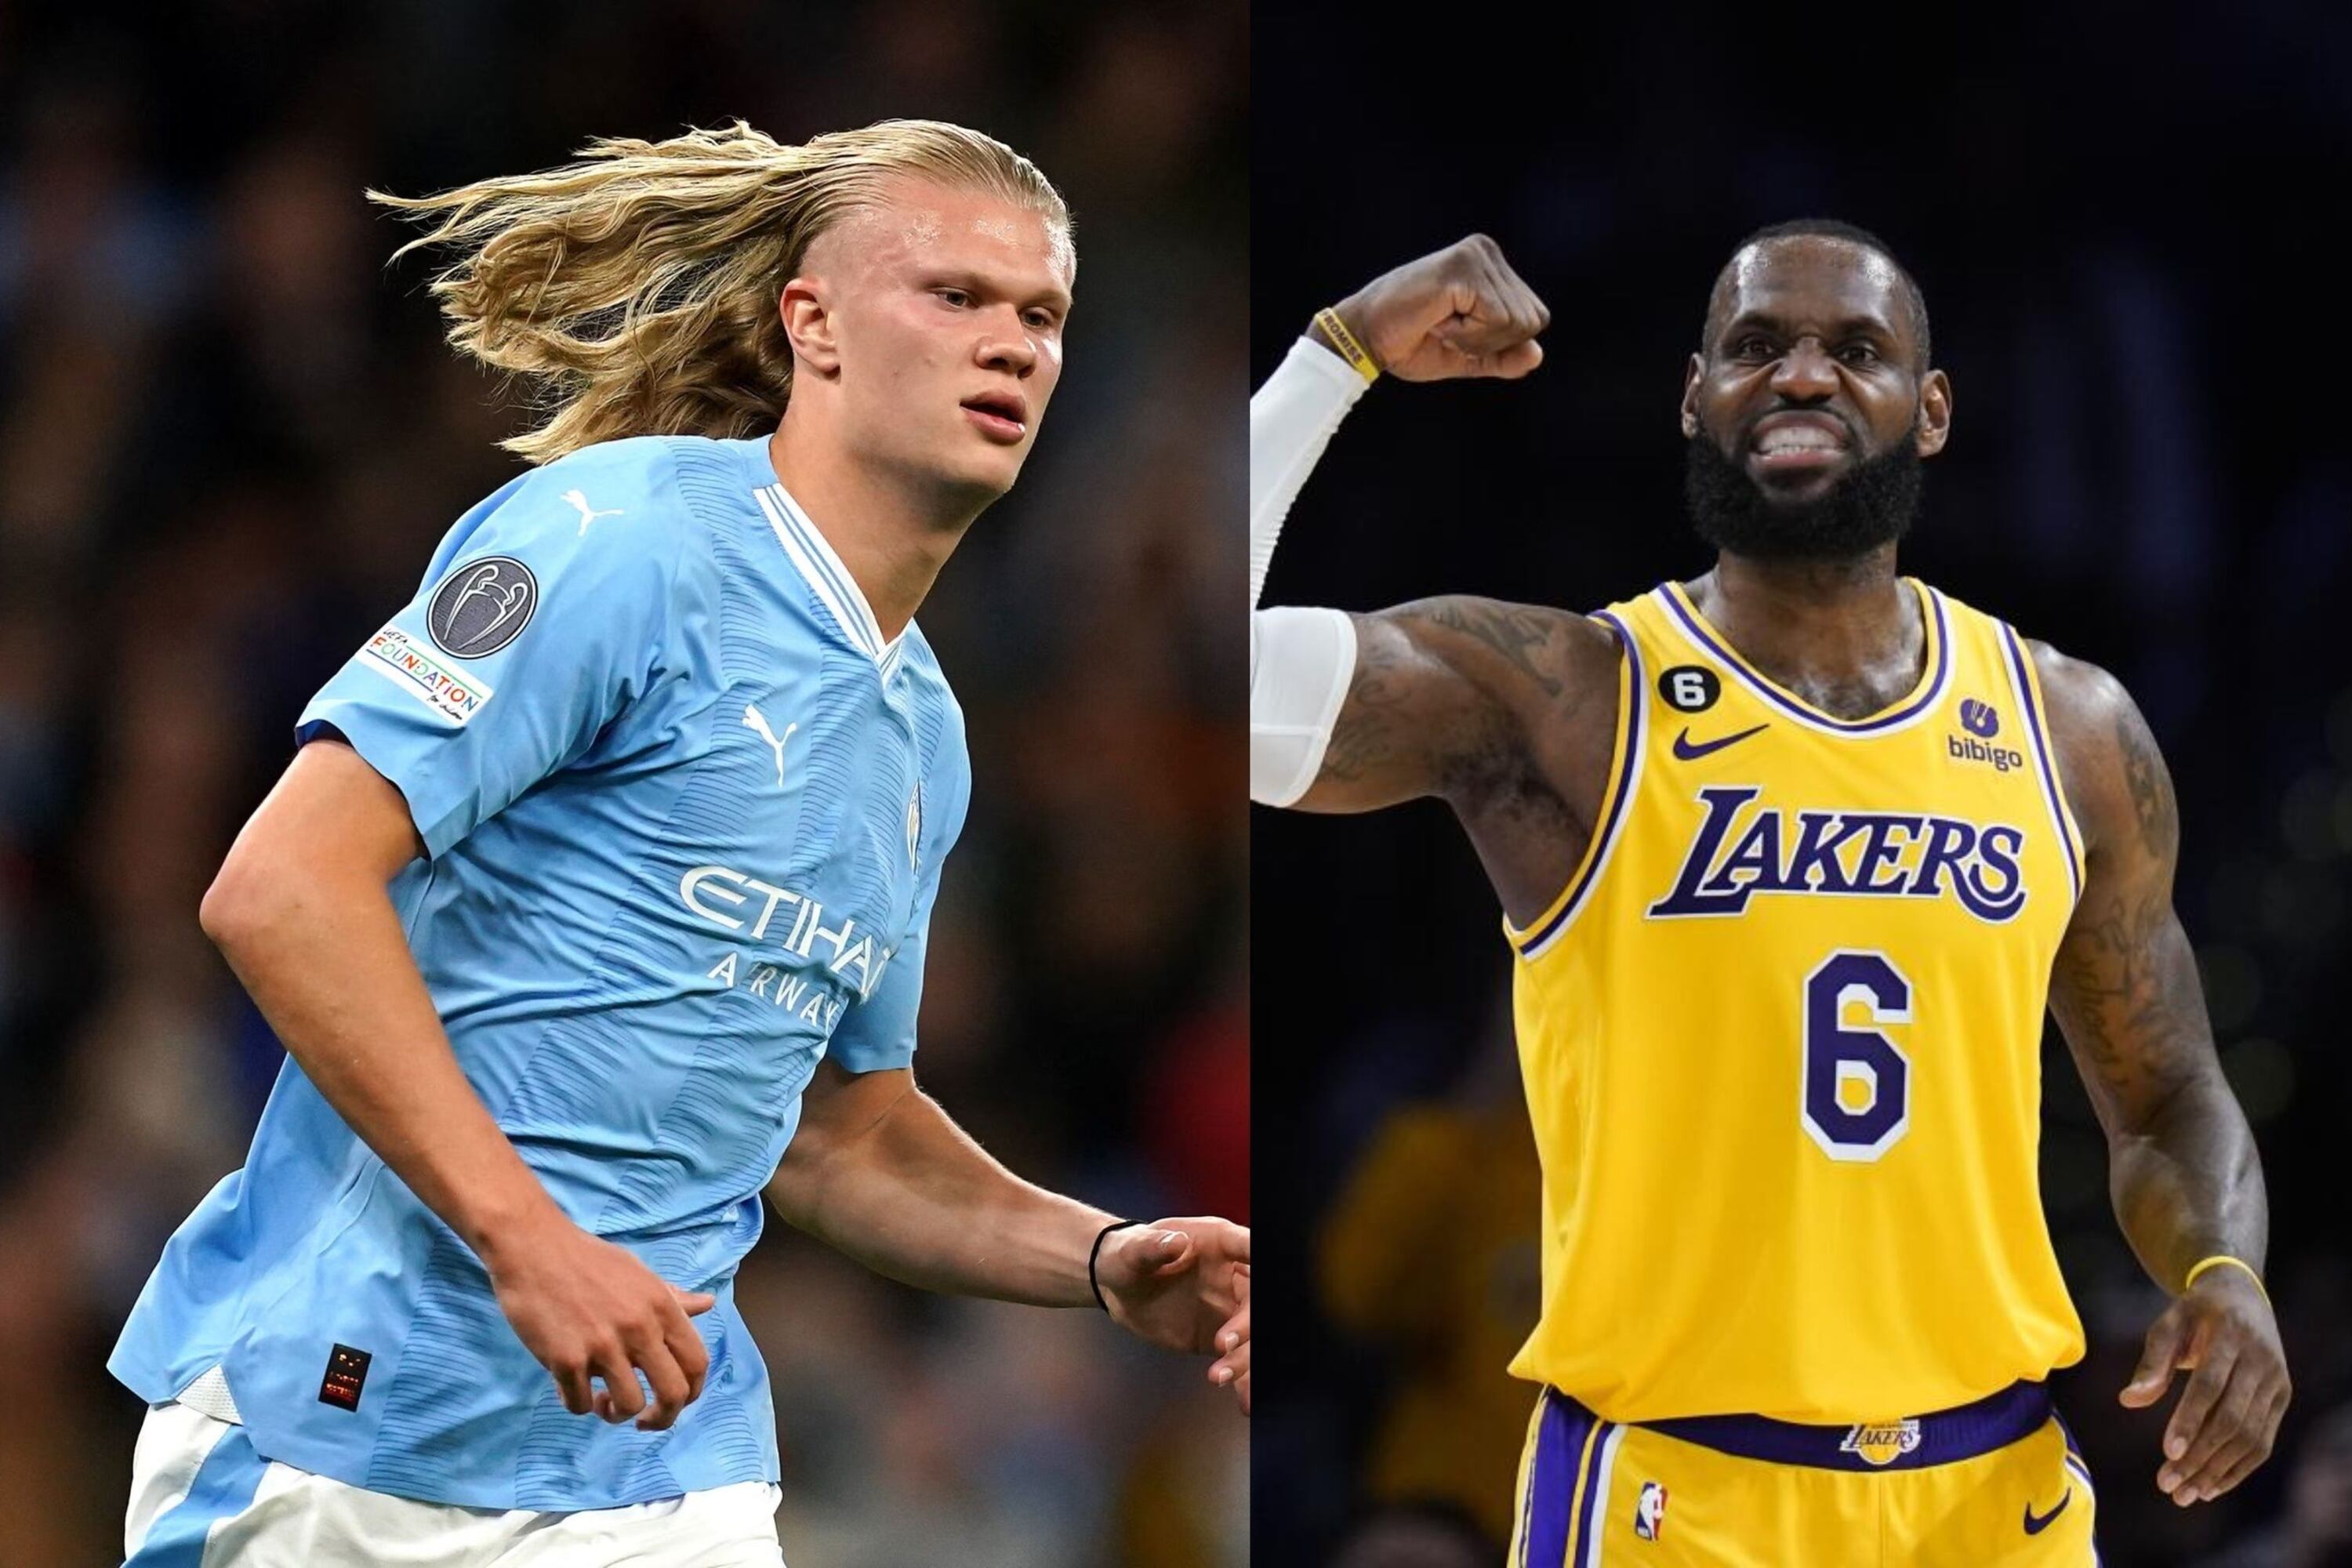 (VIDEO) LeBron James and Erling Haaland in an epic commercial that goes viral on social media